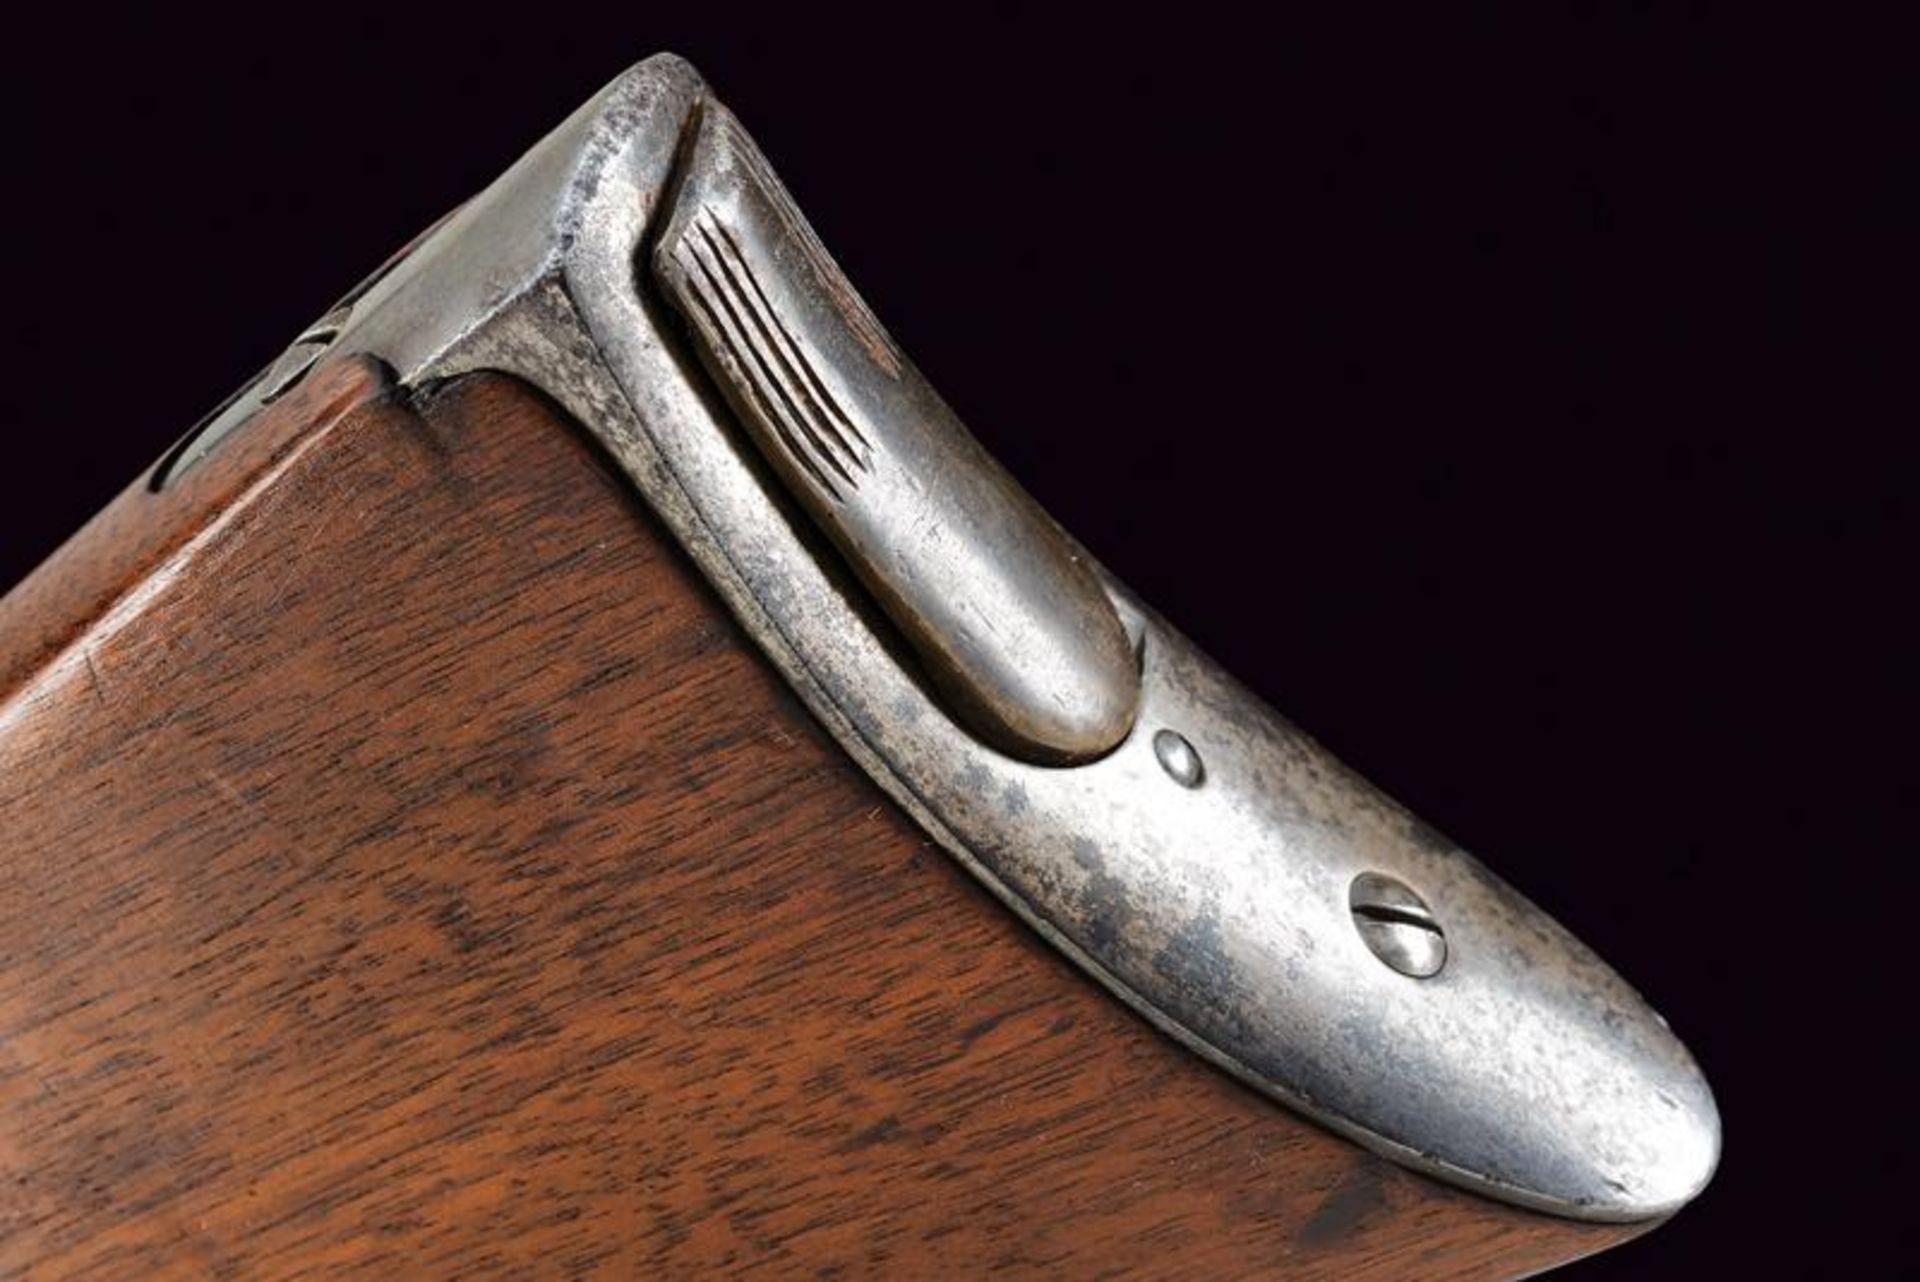 Spencer Repeating Rifle - Image 11 of 12